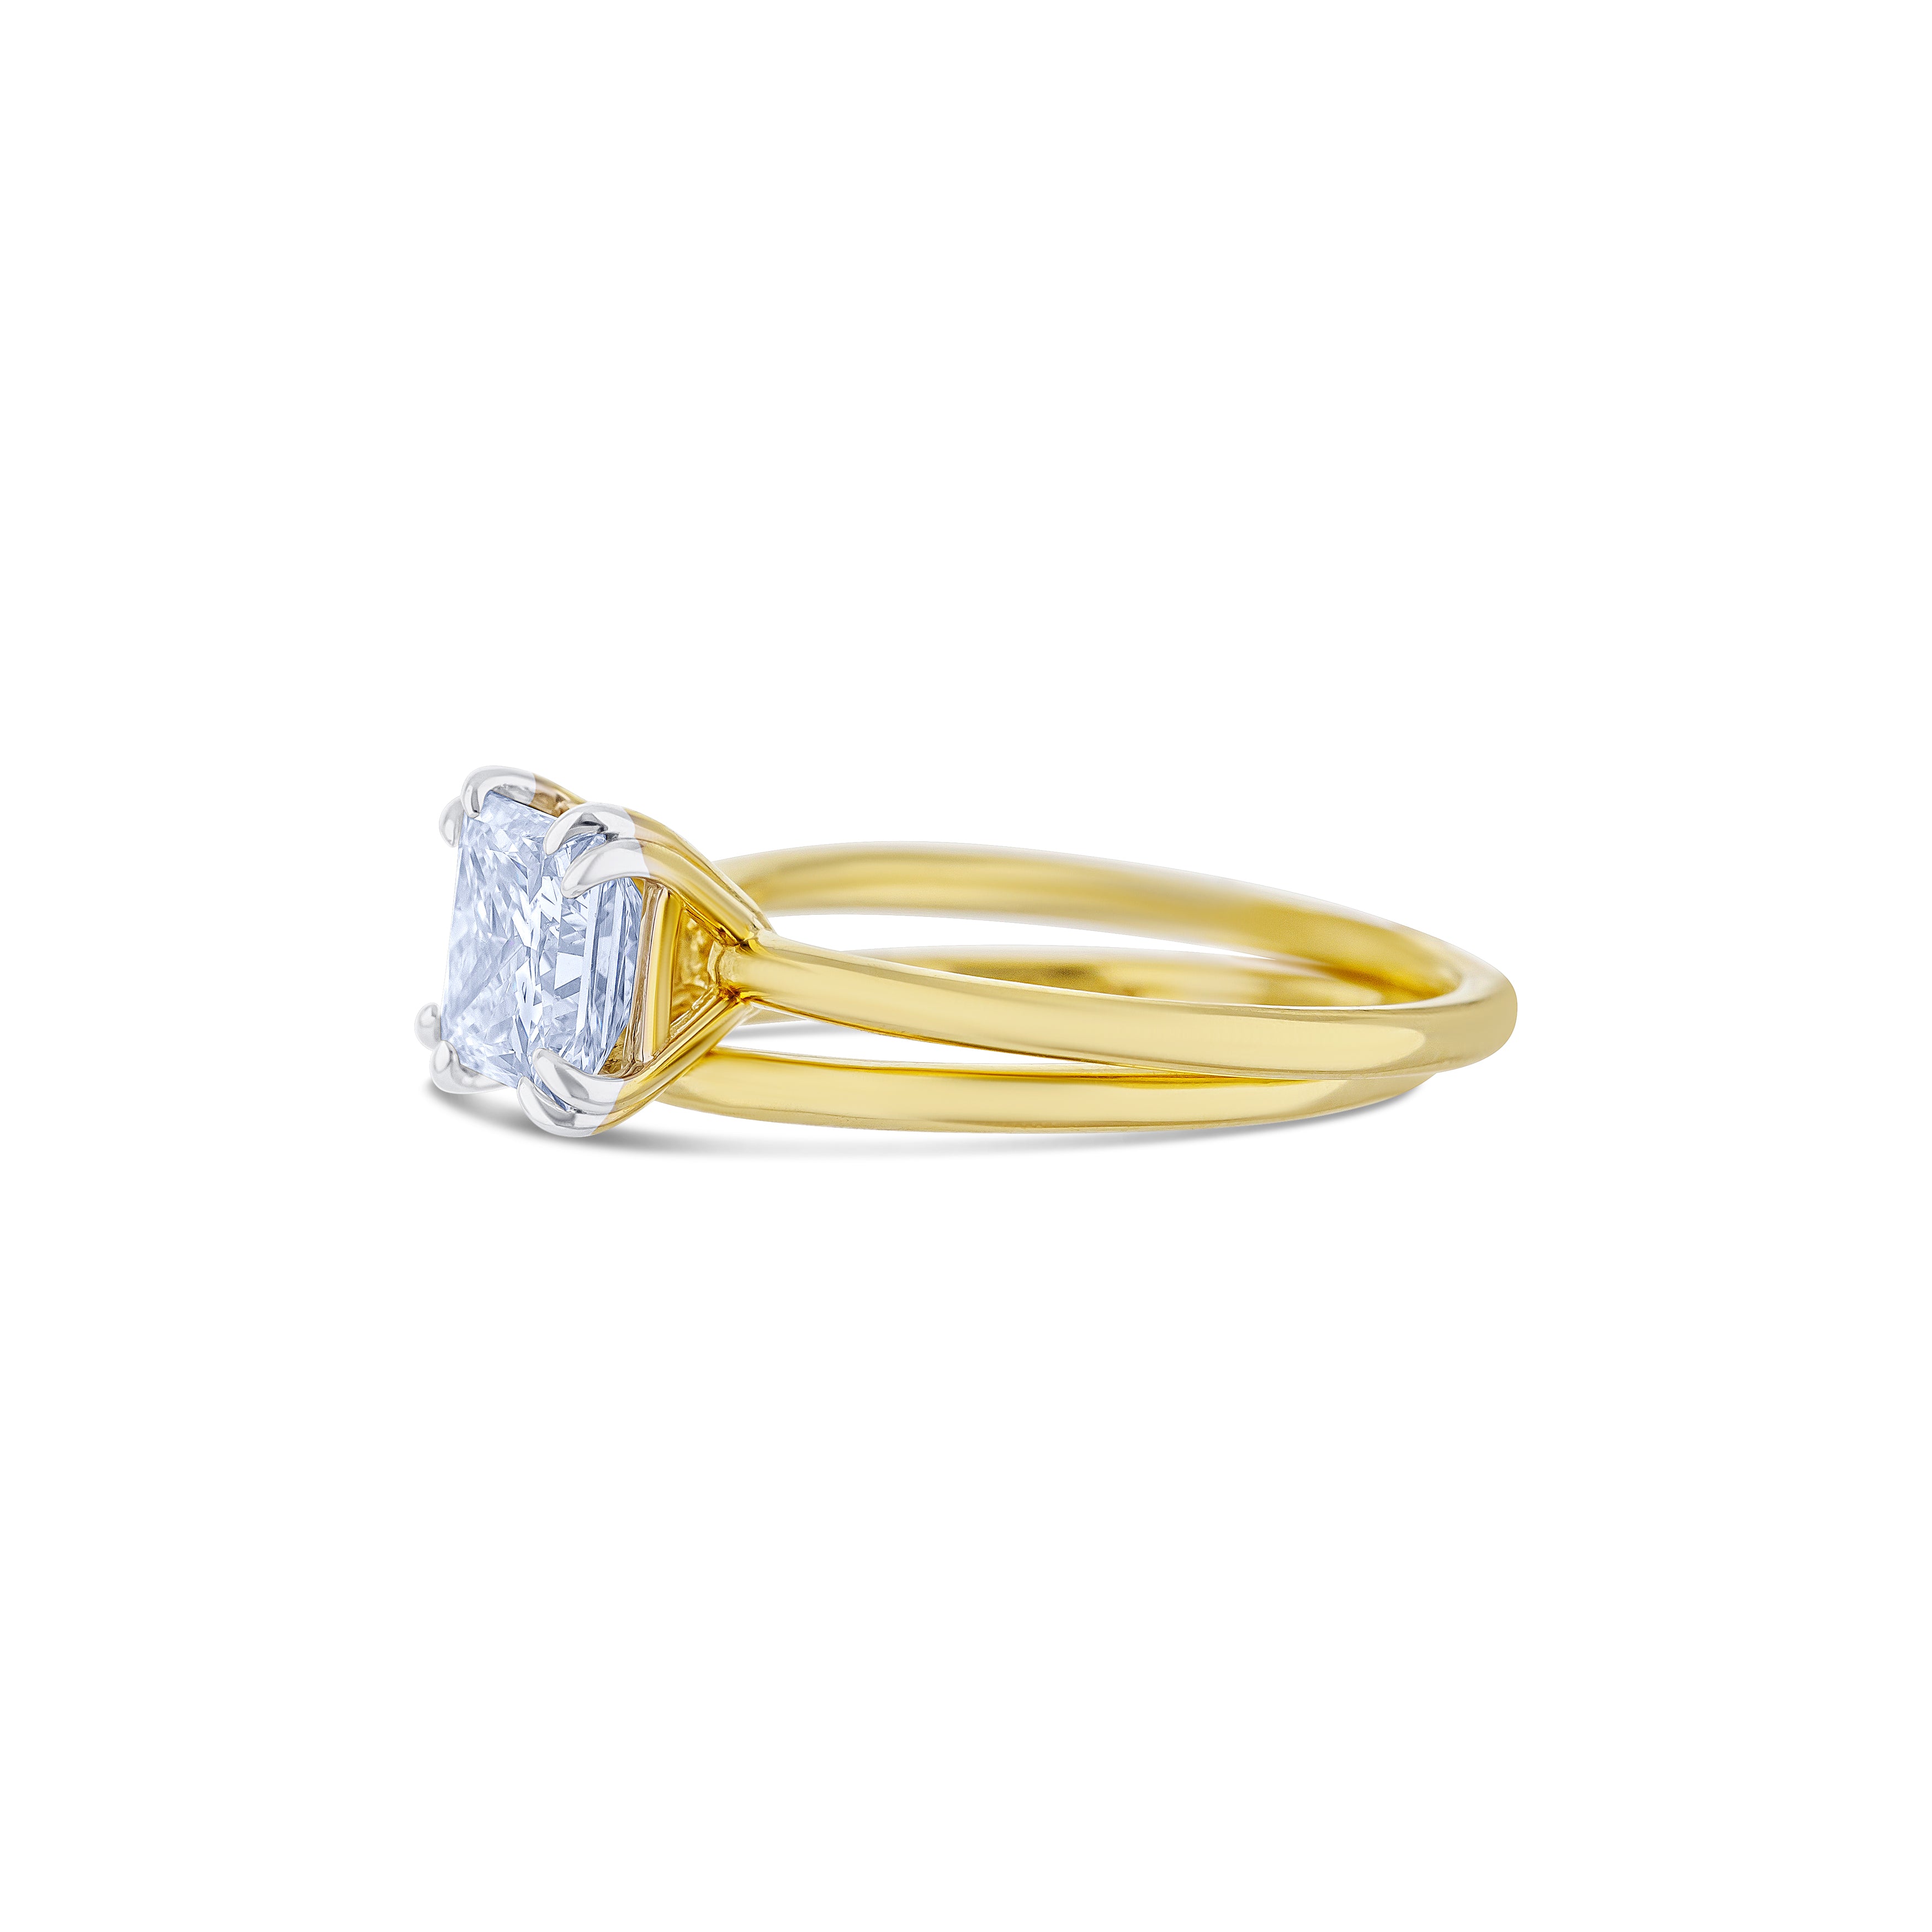 18k Yellow Gold Wedding Set Solitaire Ring